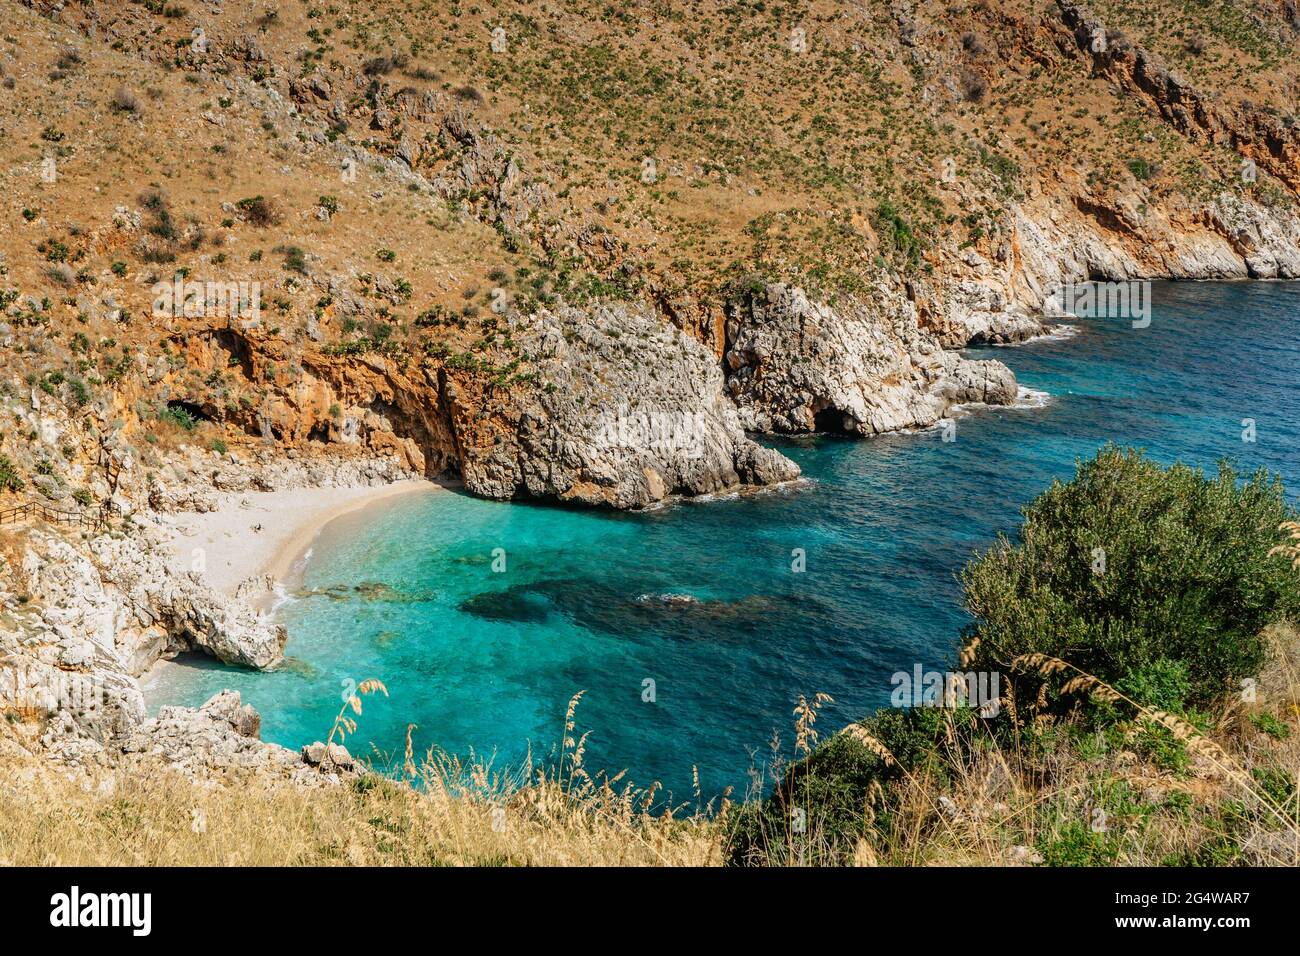 Beach vacation in Sicily,Italy, turquoise water,empty sandy beach in Zingaro Nature Reserve.Holiday paradise travel scenery.Scenic coastline with rock Stock Photo